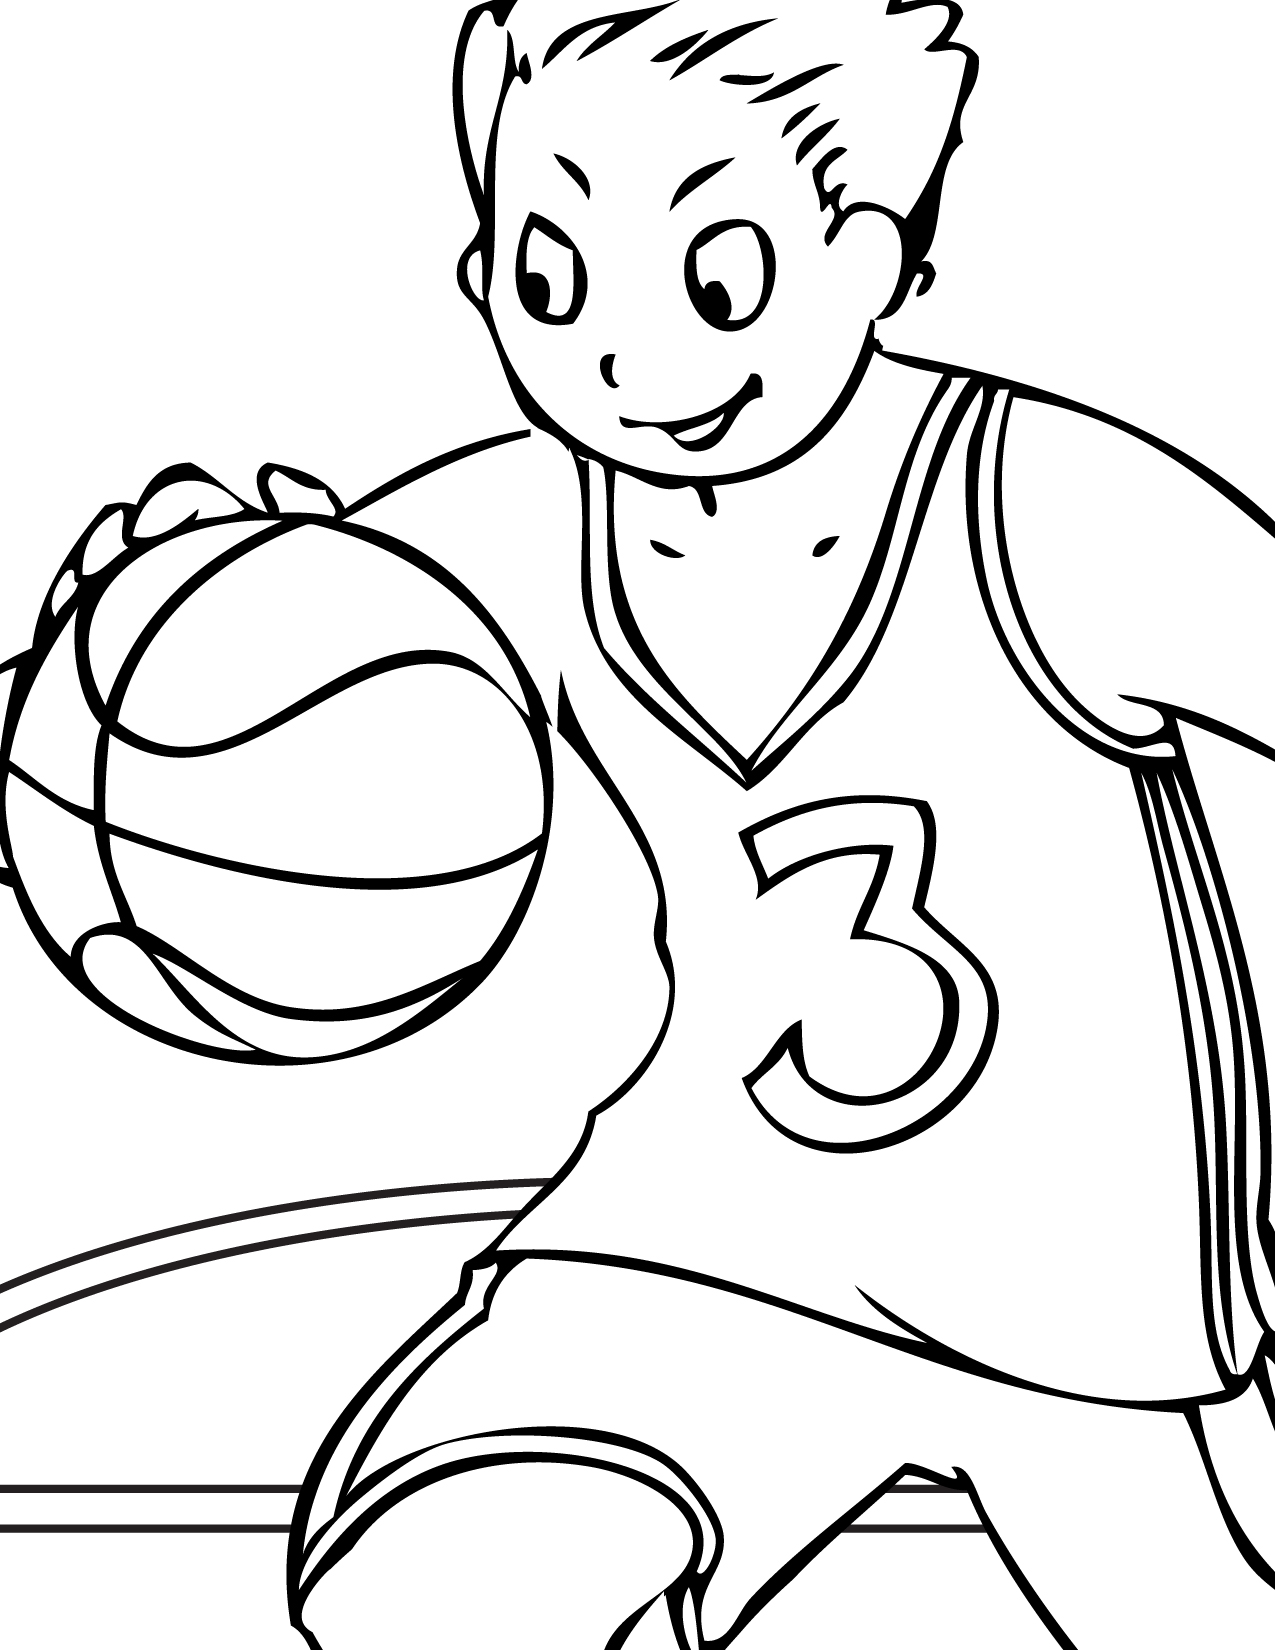 Free Volleyballs Coloring Page